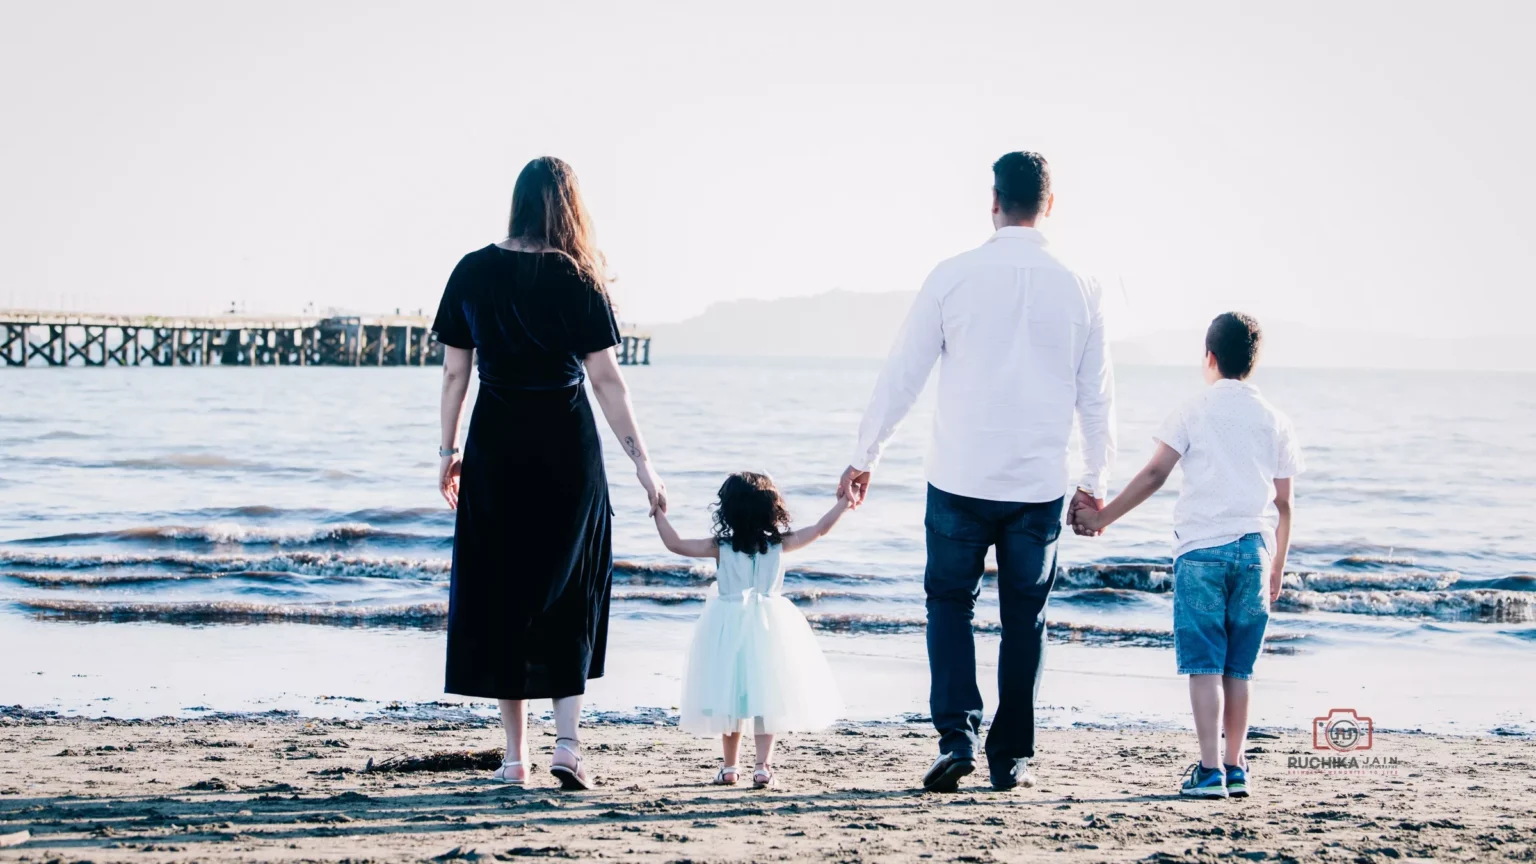 Heartwarming family portrait from behind, gazing at the beauty of the ocean on the beach - Dress for Family Photoshoot Guide.